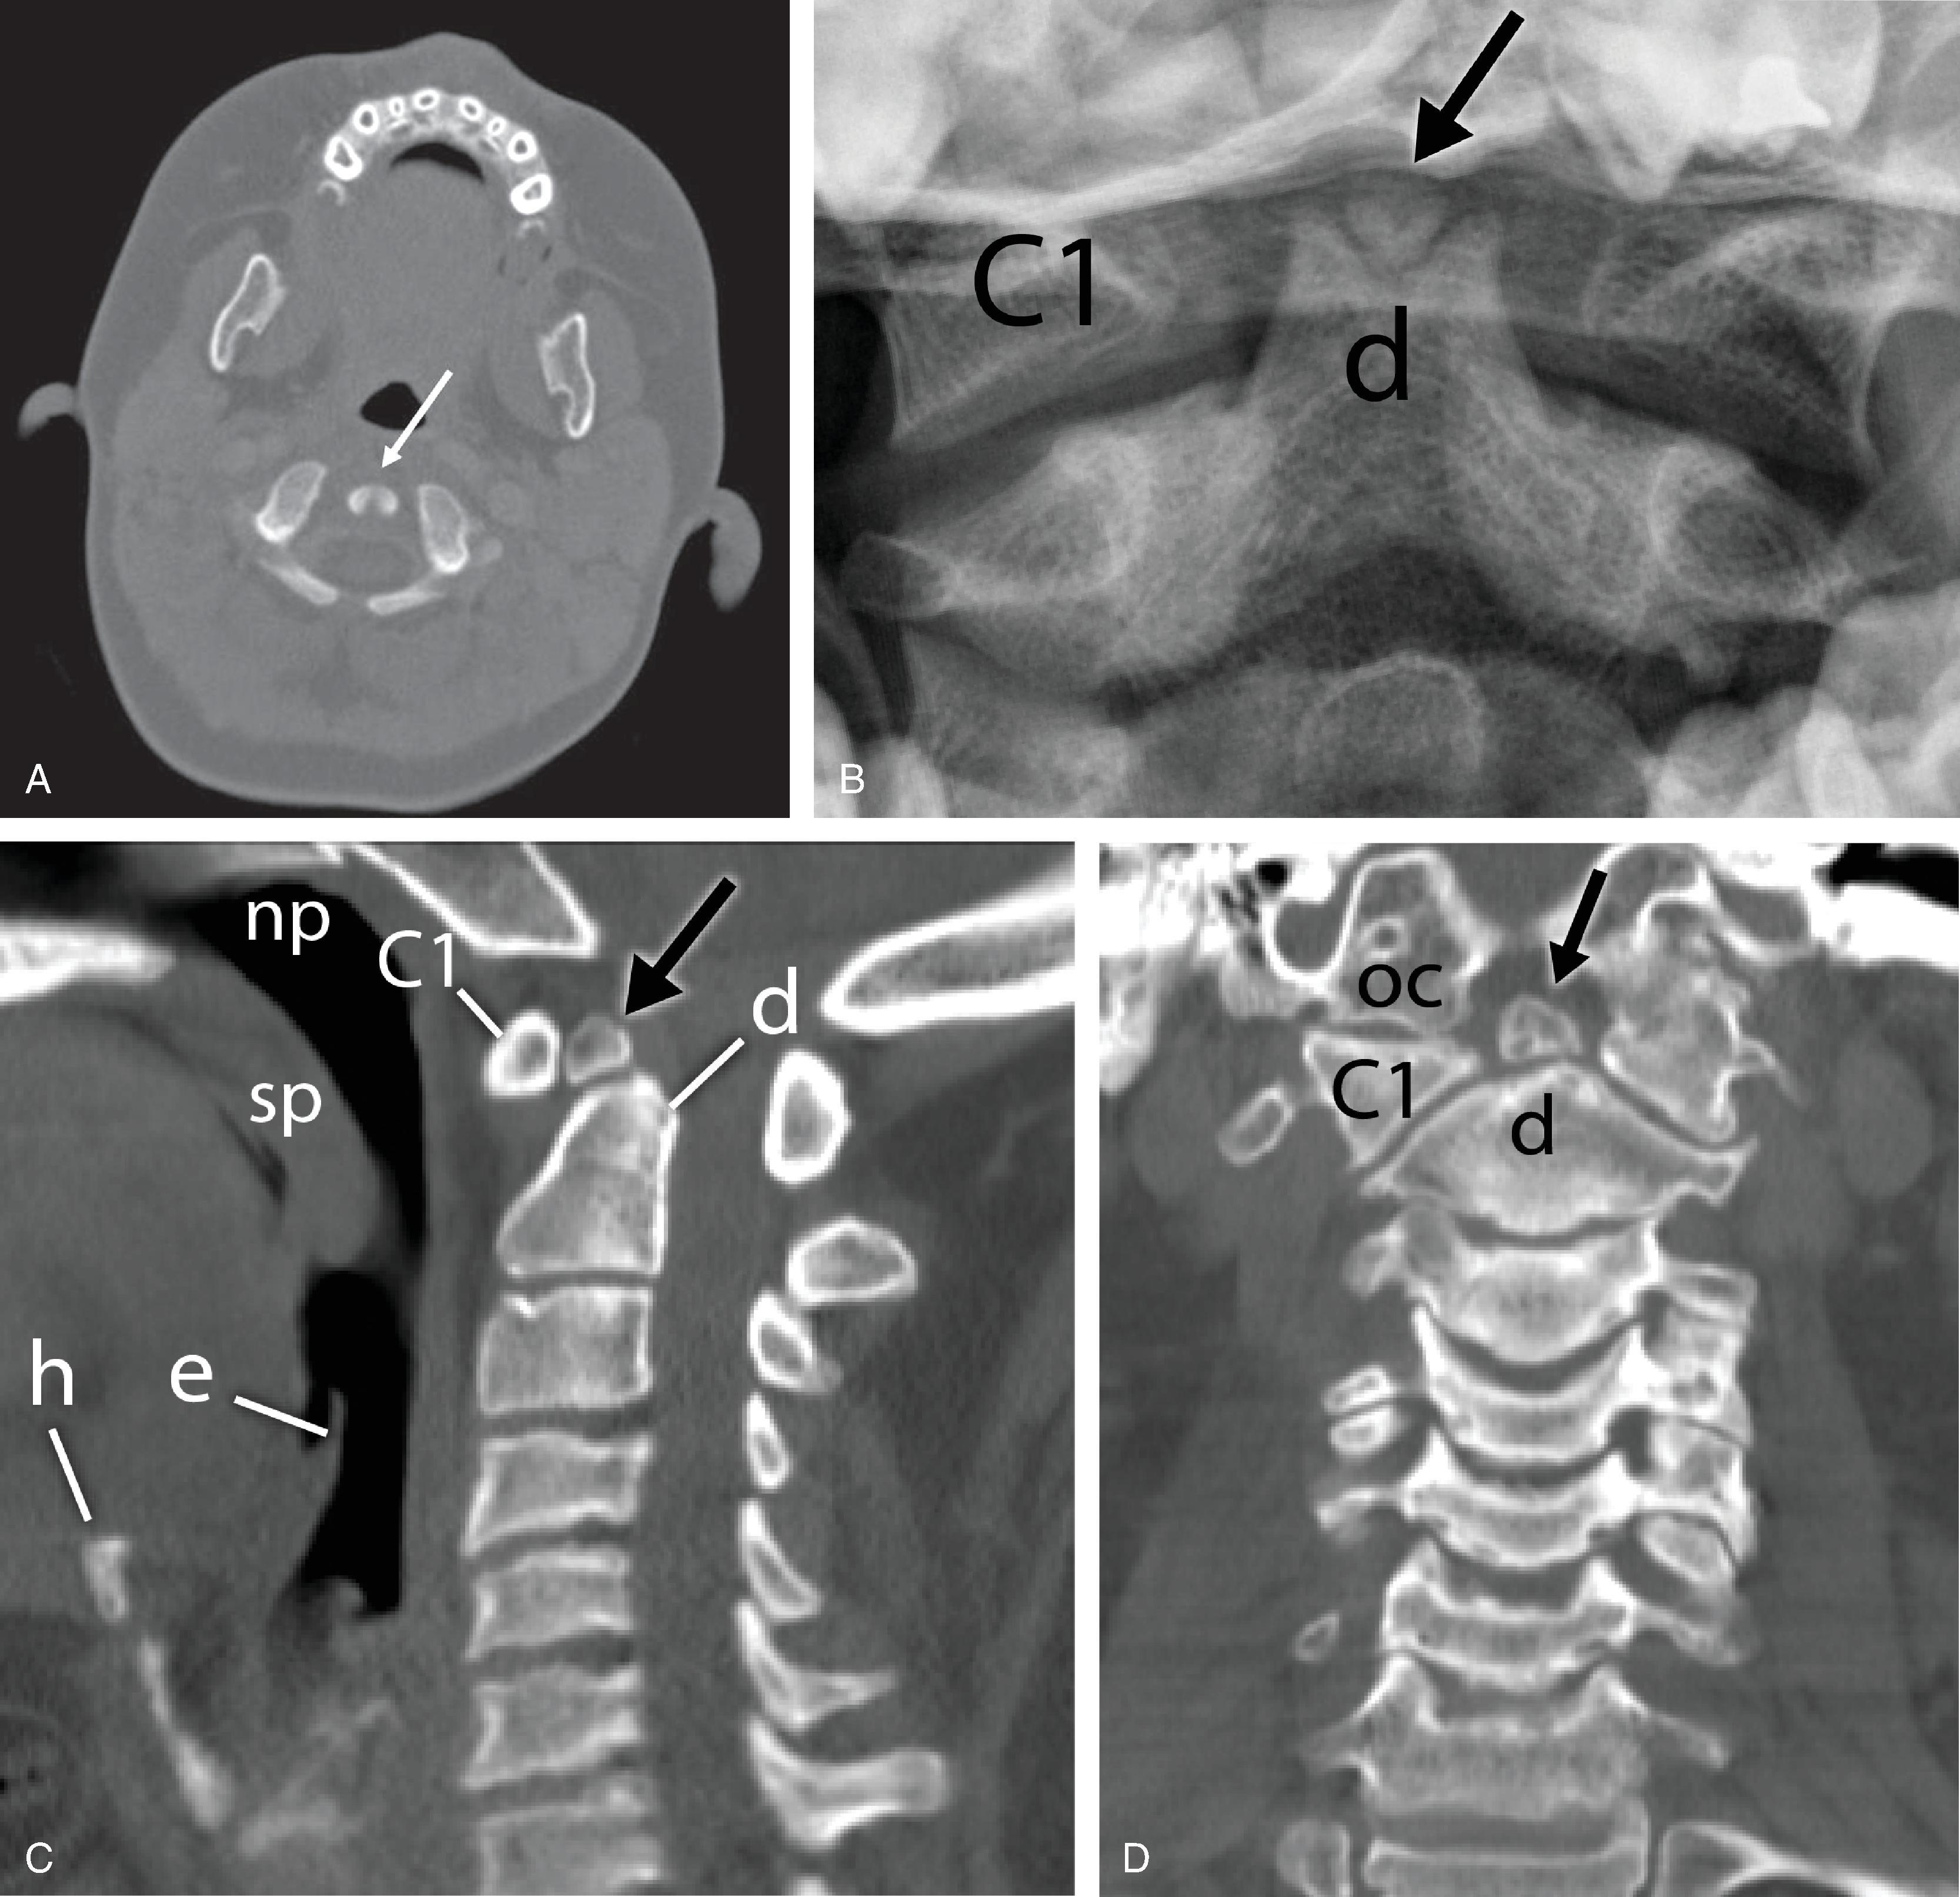 Fig. 2.2, Normal variations of the dens. (A) Cleft dens ( arrow ) on axial computed tomography (CT). (B) Frontal radiograph demonstrating a persistent ossiculum terminale ( arrow ), representing a nonunited terminal dental ossification center. (C) Sagittal and (D) coronal CTs, which show a well-corticated ossific density superior to a foreshortened dens, compatible with os odontoideum ( arrow ). There is characteristic secondary hypertrophy of the anterior C1 arch. Congenital and remote traumatic etiologies have been hypothesized. d , dens; C1 , C1 vertebrae; oc , occipital condyle; np , nasopharynx; e , epiglottis; h , hyoid; sp , soft palate.